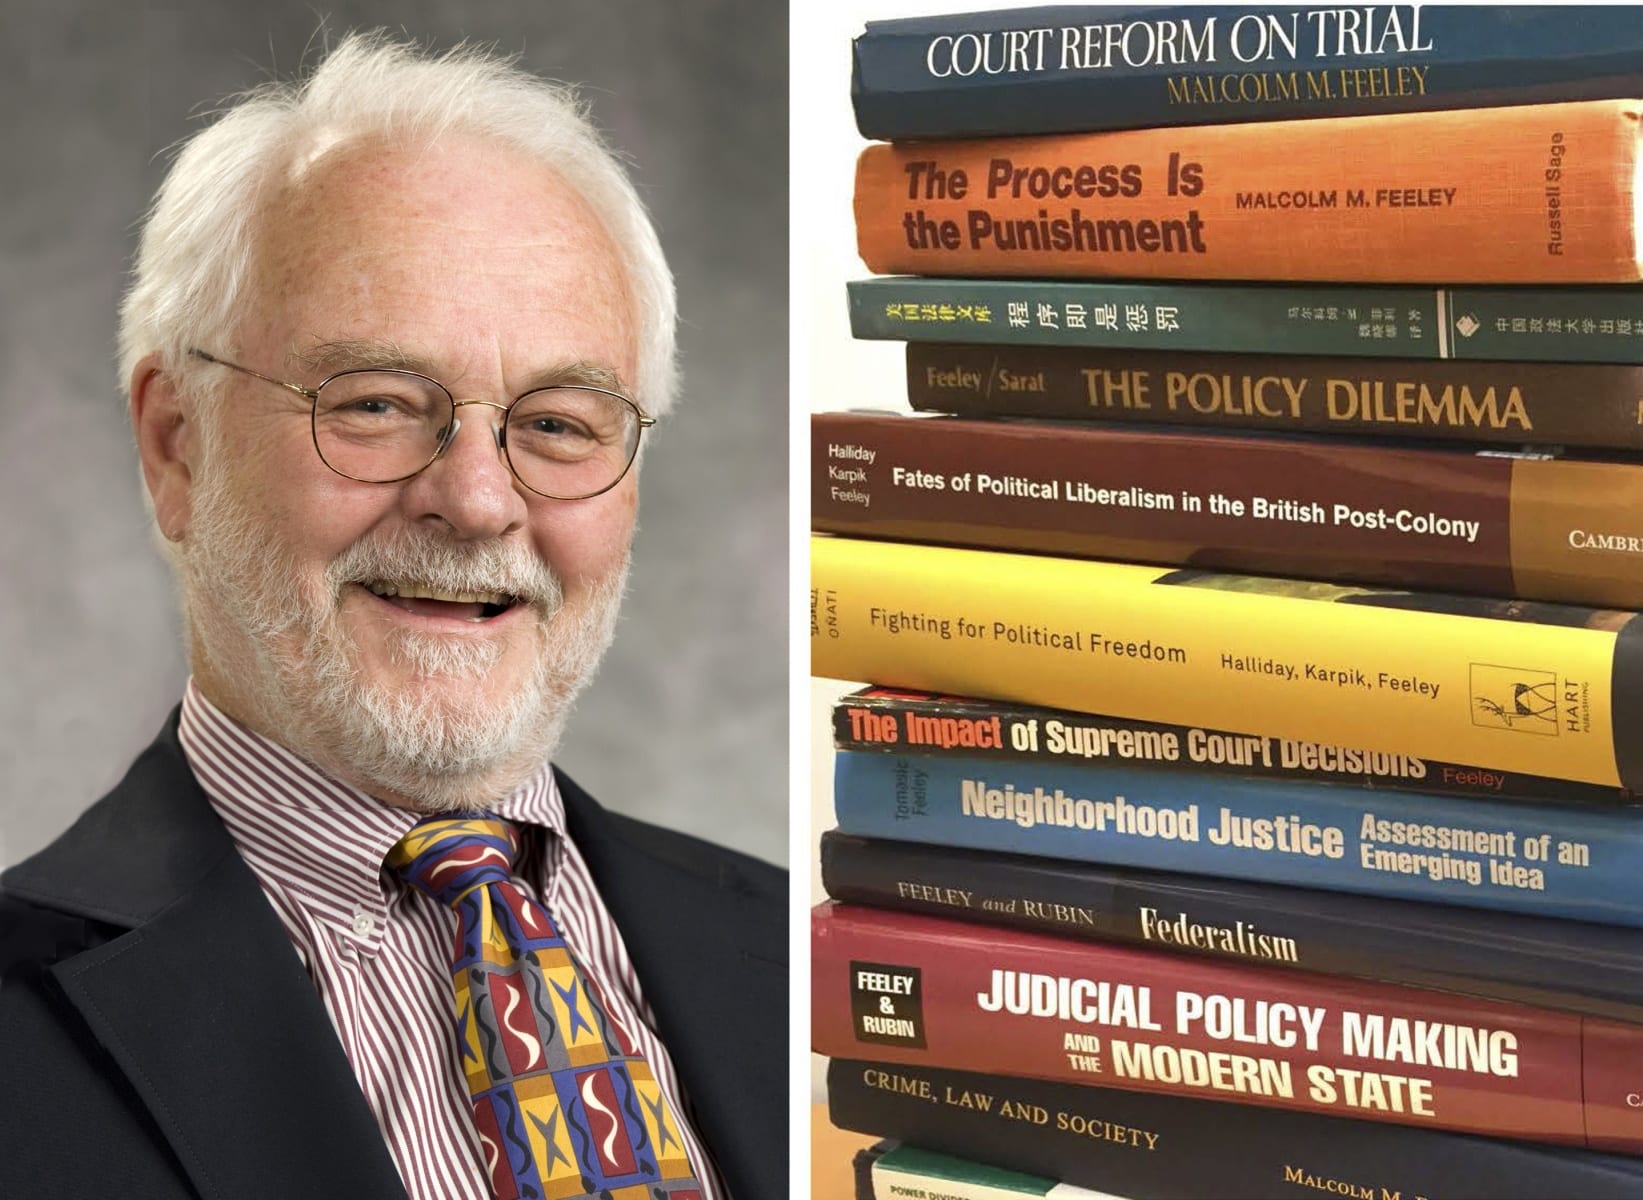 Malcolm M. Feeley headshot on left with separated photo of related law, policy, and justice books on right.